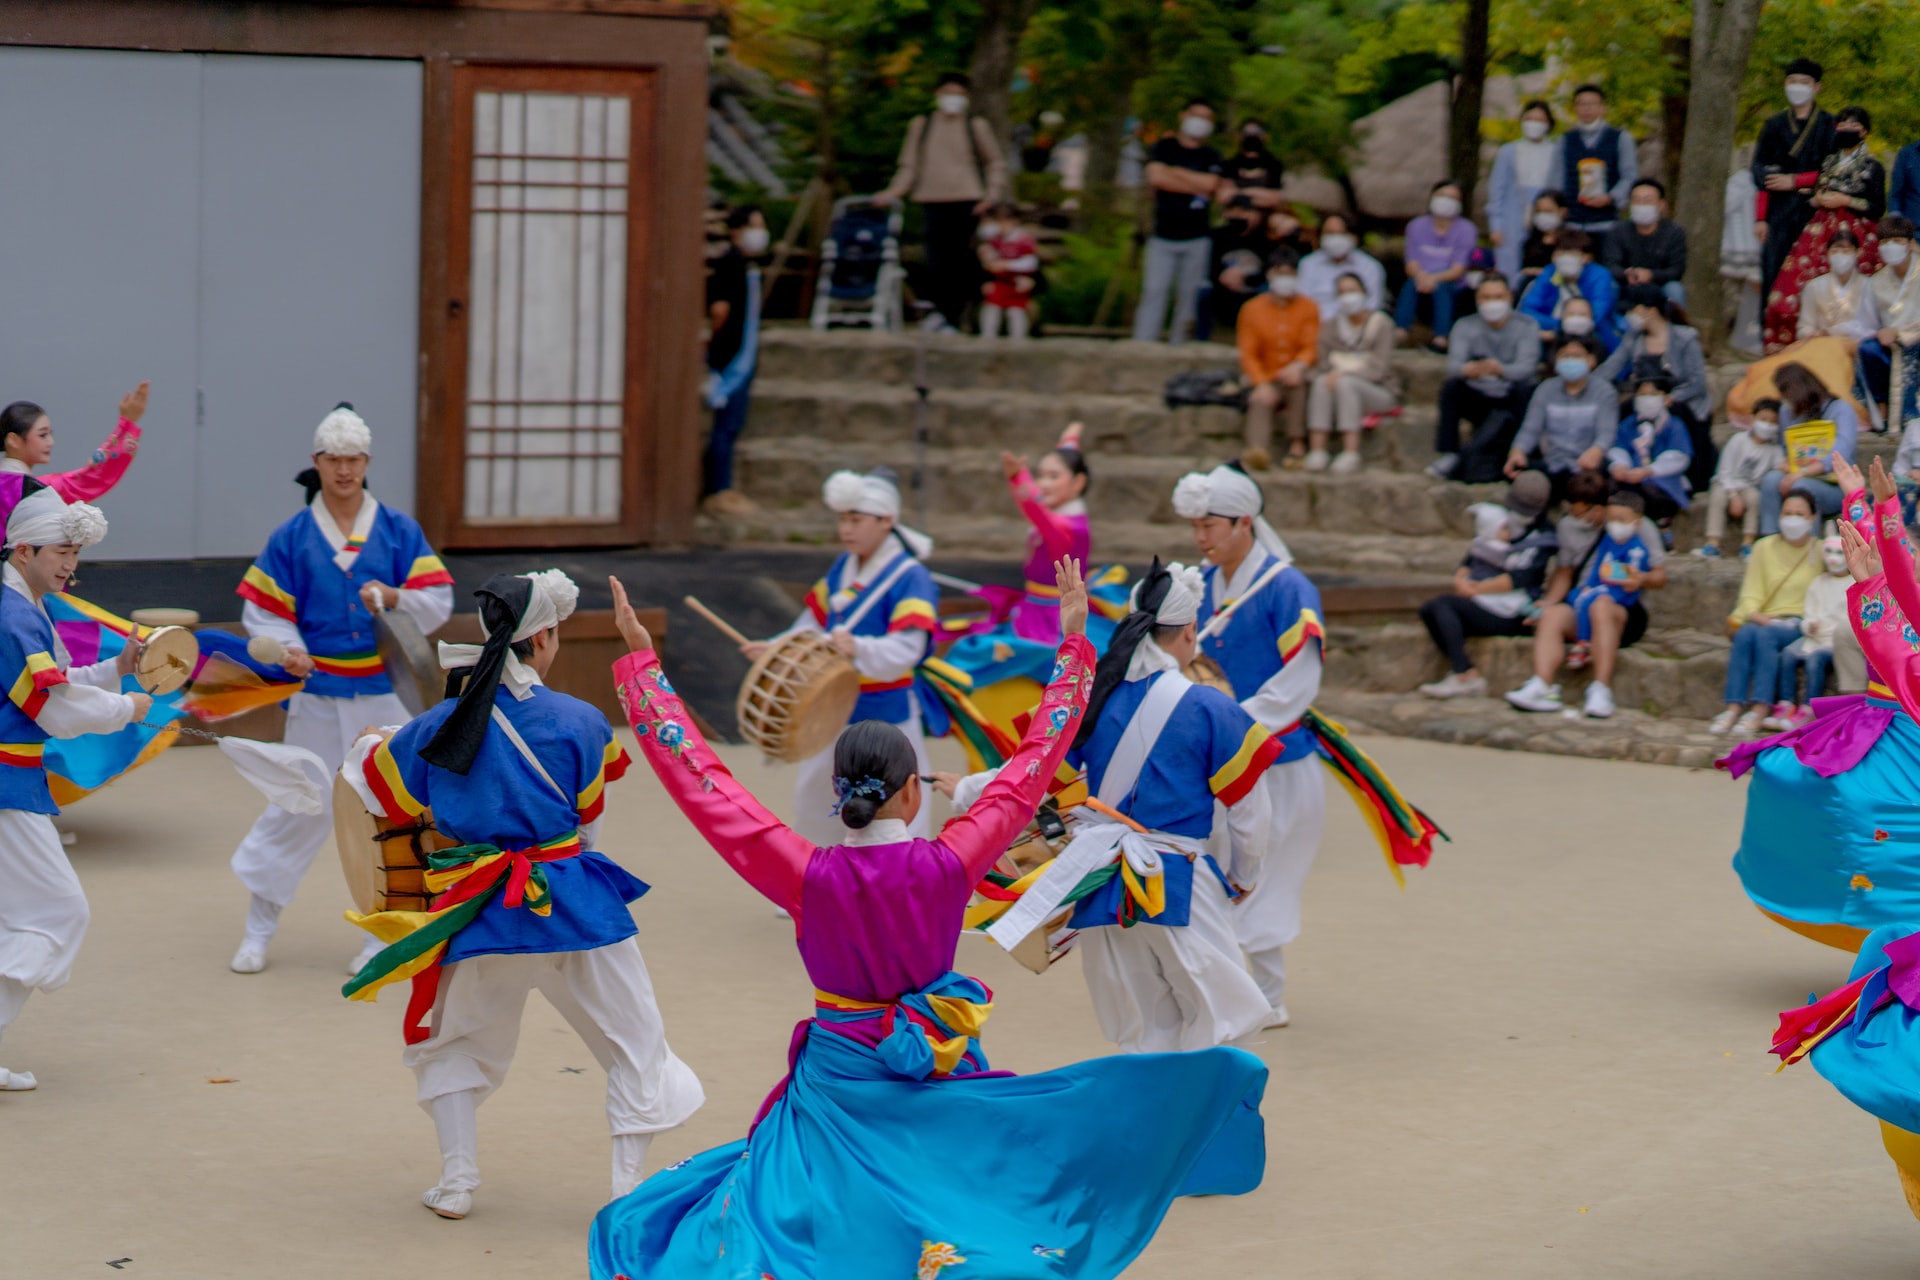 A photo of Korean folk dancers in colorful costumes performing for a crowd